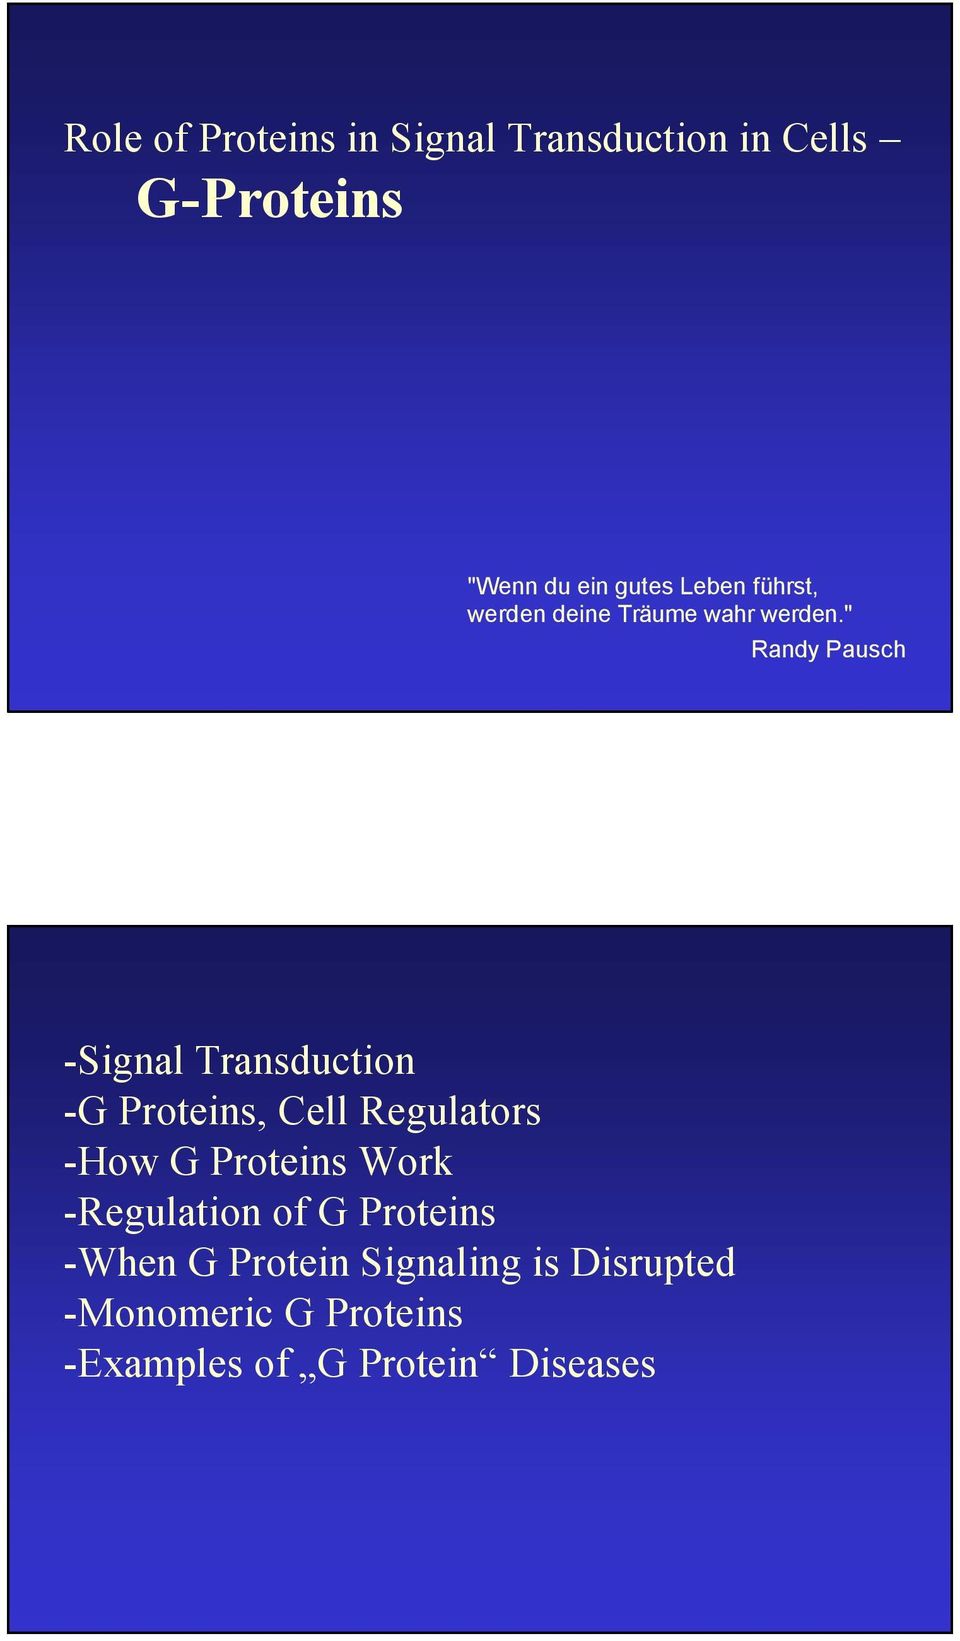 " Randy Pausch -Signal Transduction -G Proteins, Cell Regulators -How G Proteins